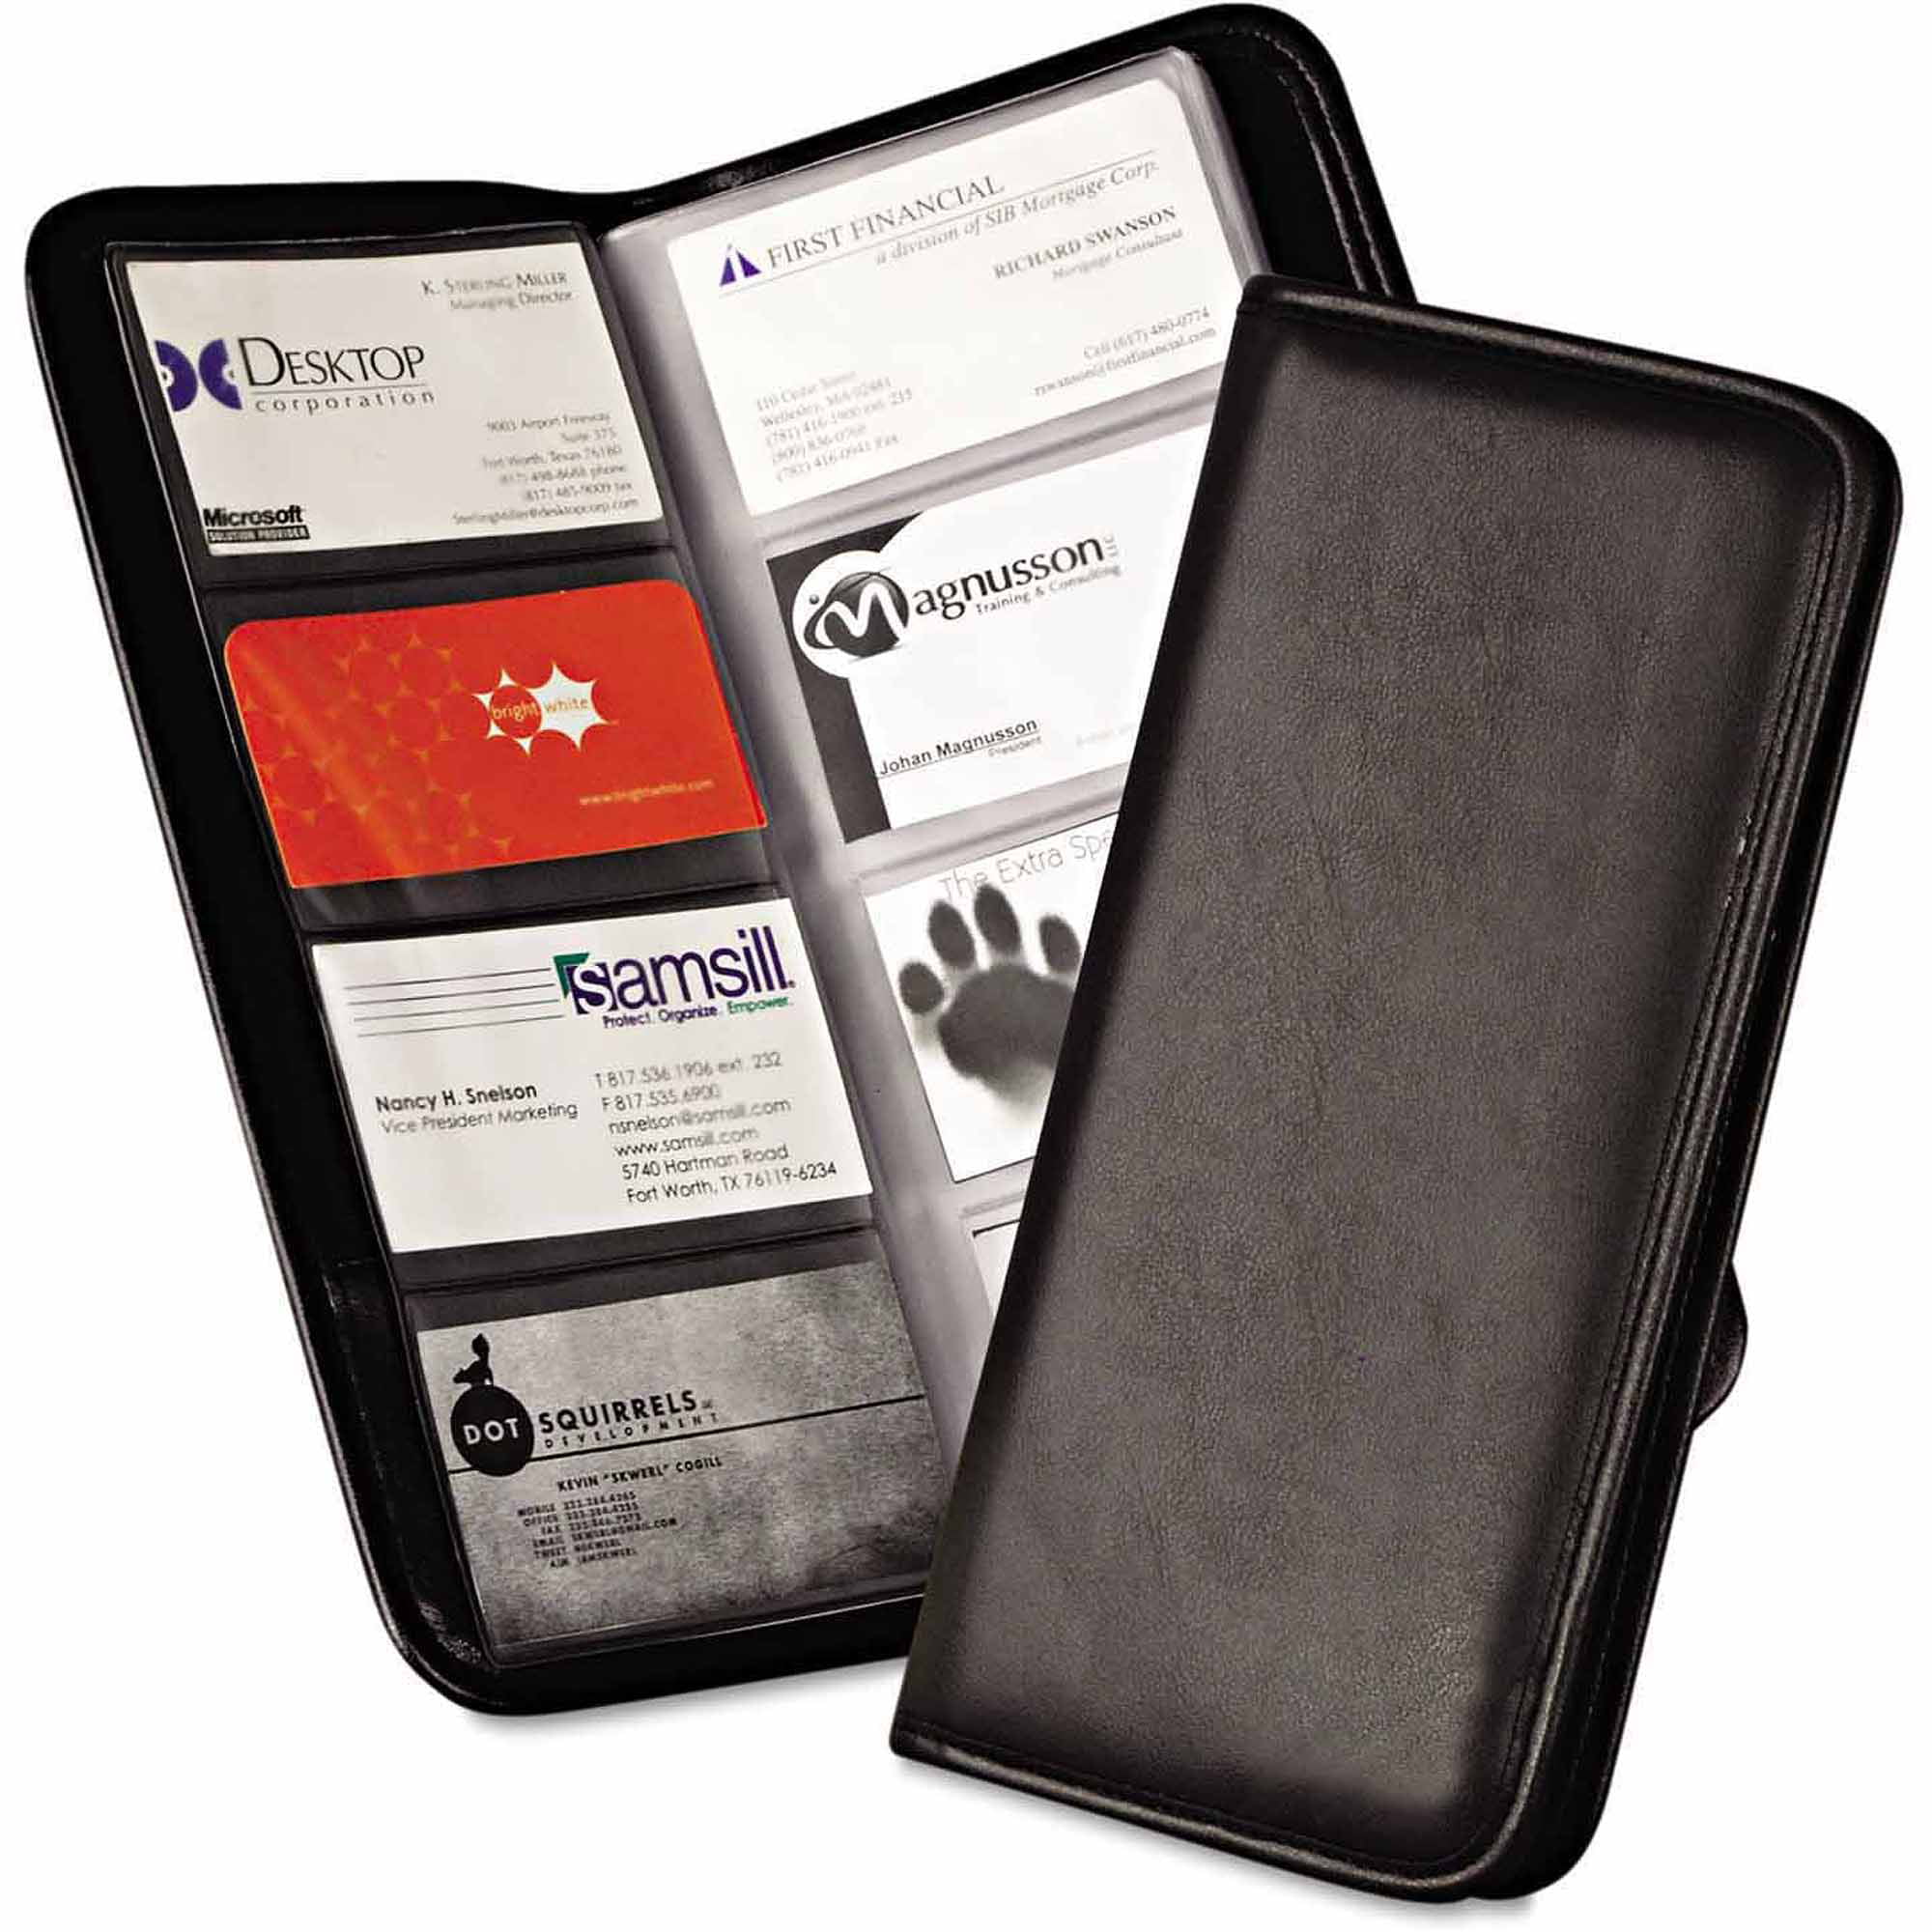 Samsill Regal Leather Business Card Wallet Holds 25 2 x 3 1/2 Cards, Black - www.bagssaleusa.com